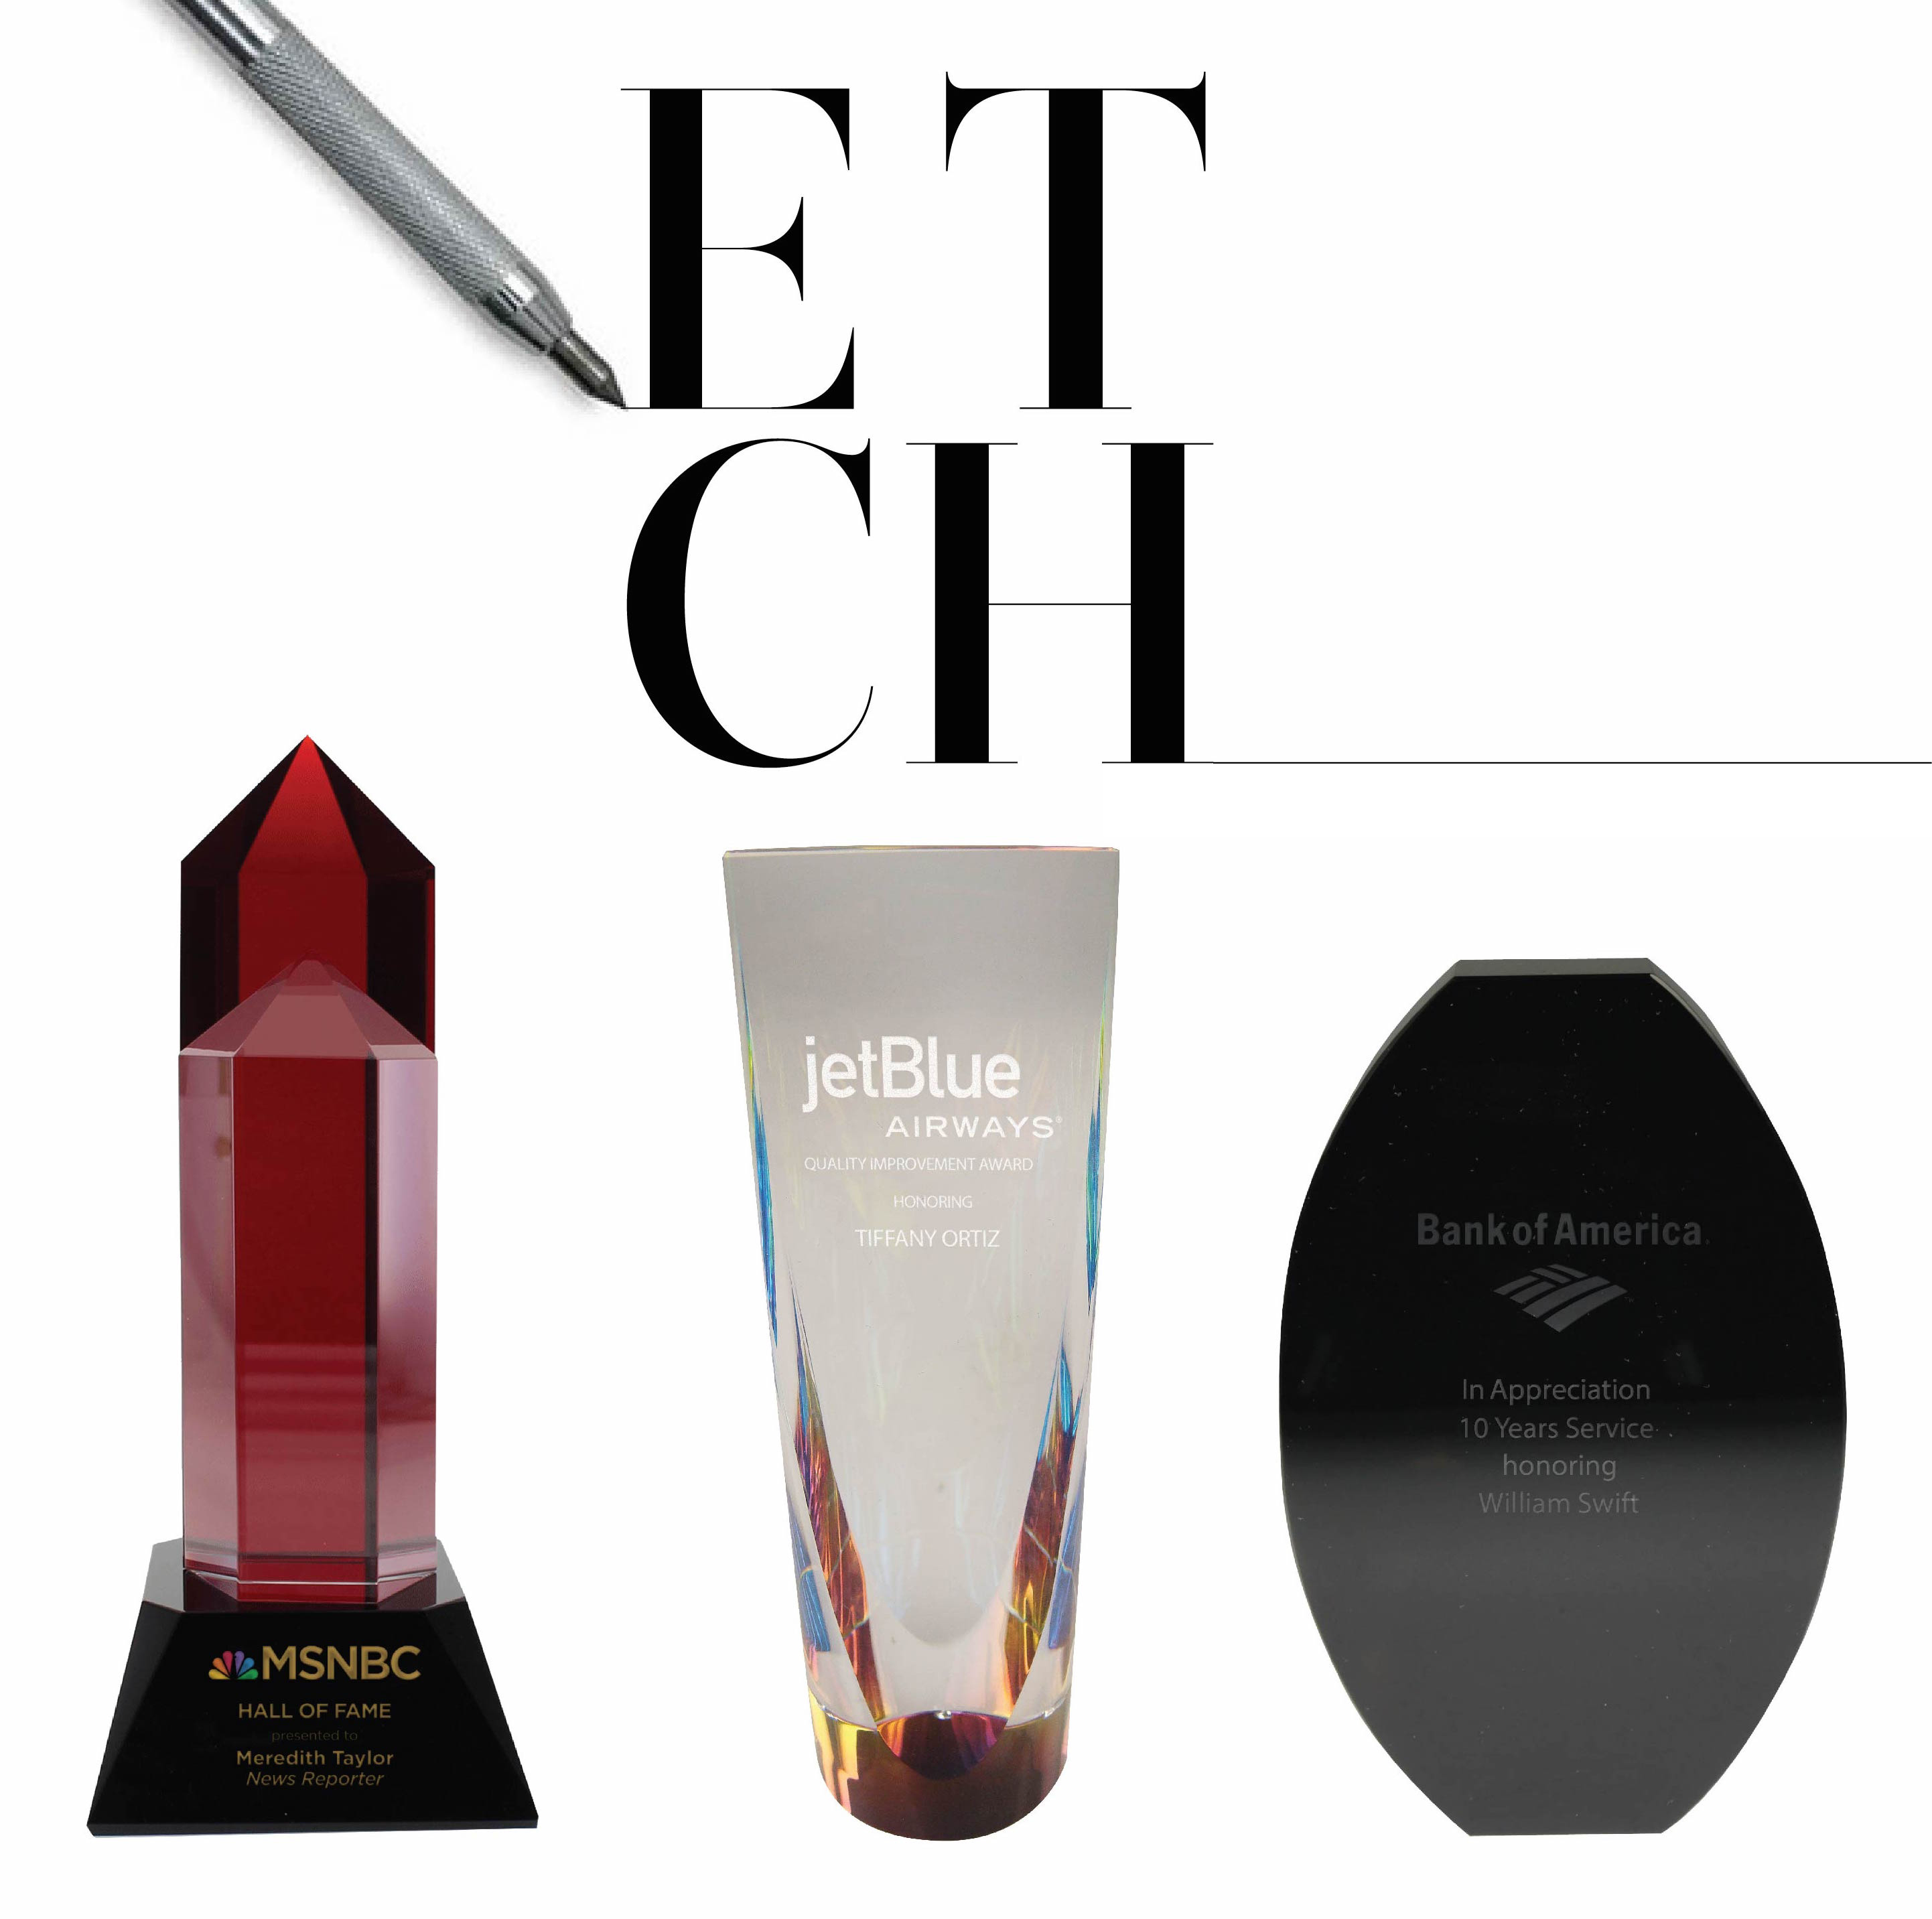 3 awards personalized with etching and logos. From left to right: Hexagon Red, Dichro Crystal, Oval Interchange.